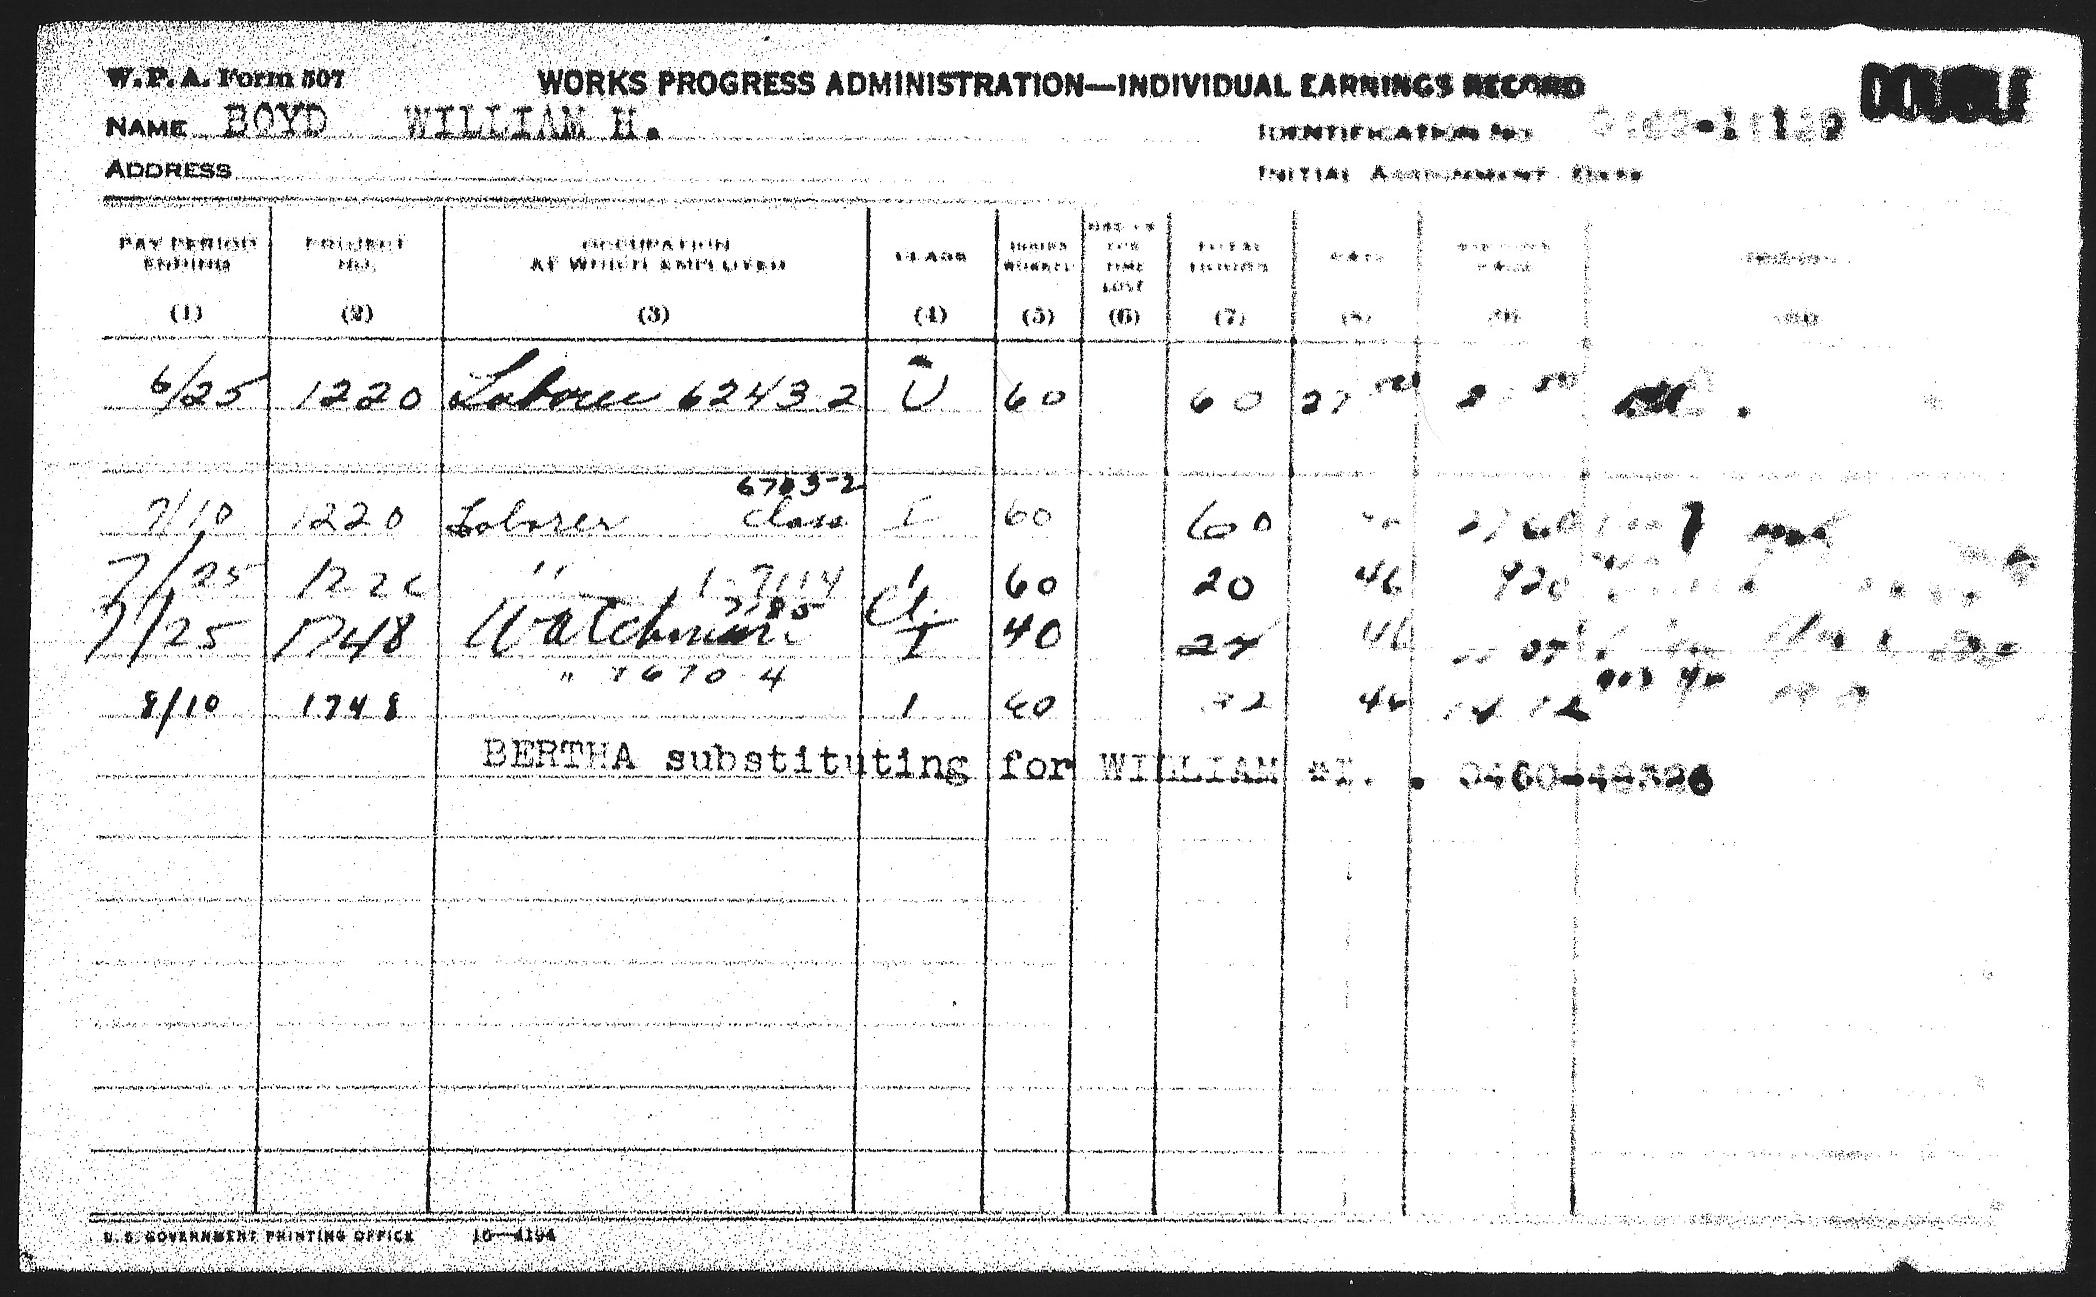 Copy 2 of an individual earnings record for William H. Boyd